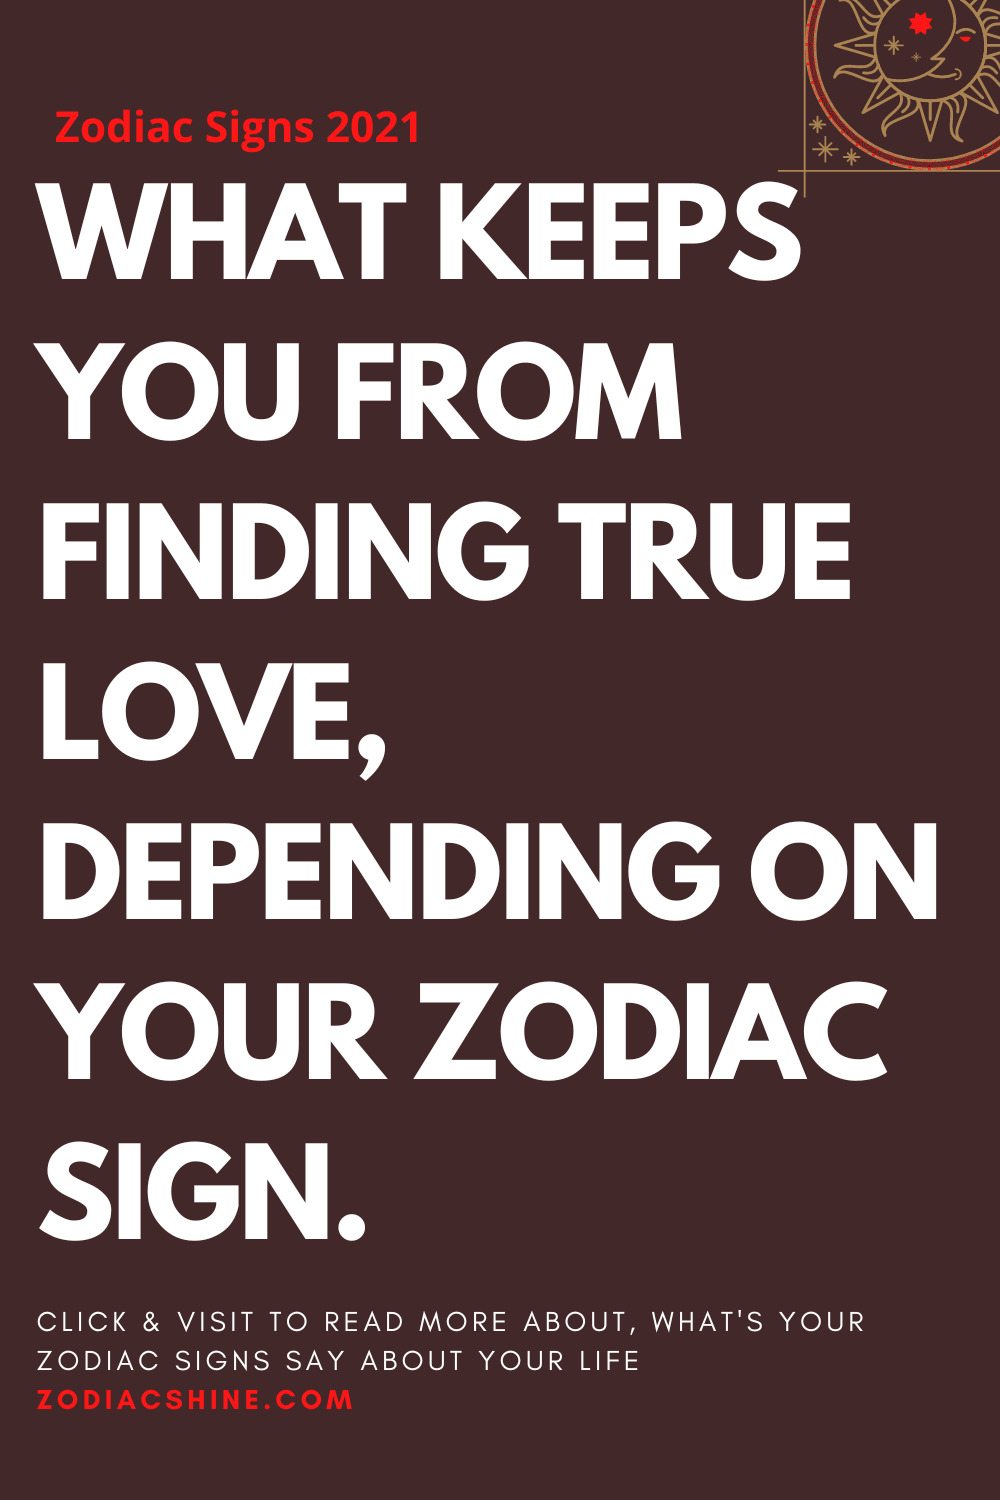 WHAT KEEPS YOU FROM FINDING TRUE LOVE, DEPENDING ON YOUR ZODIAC SIGN.